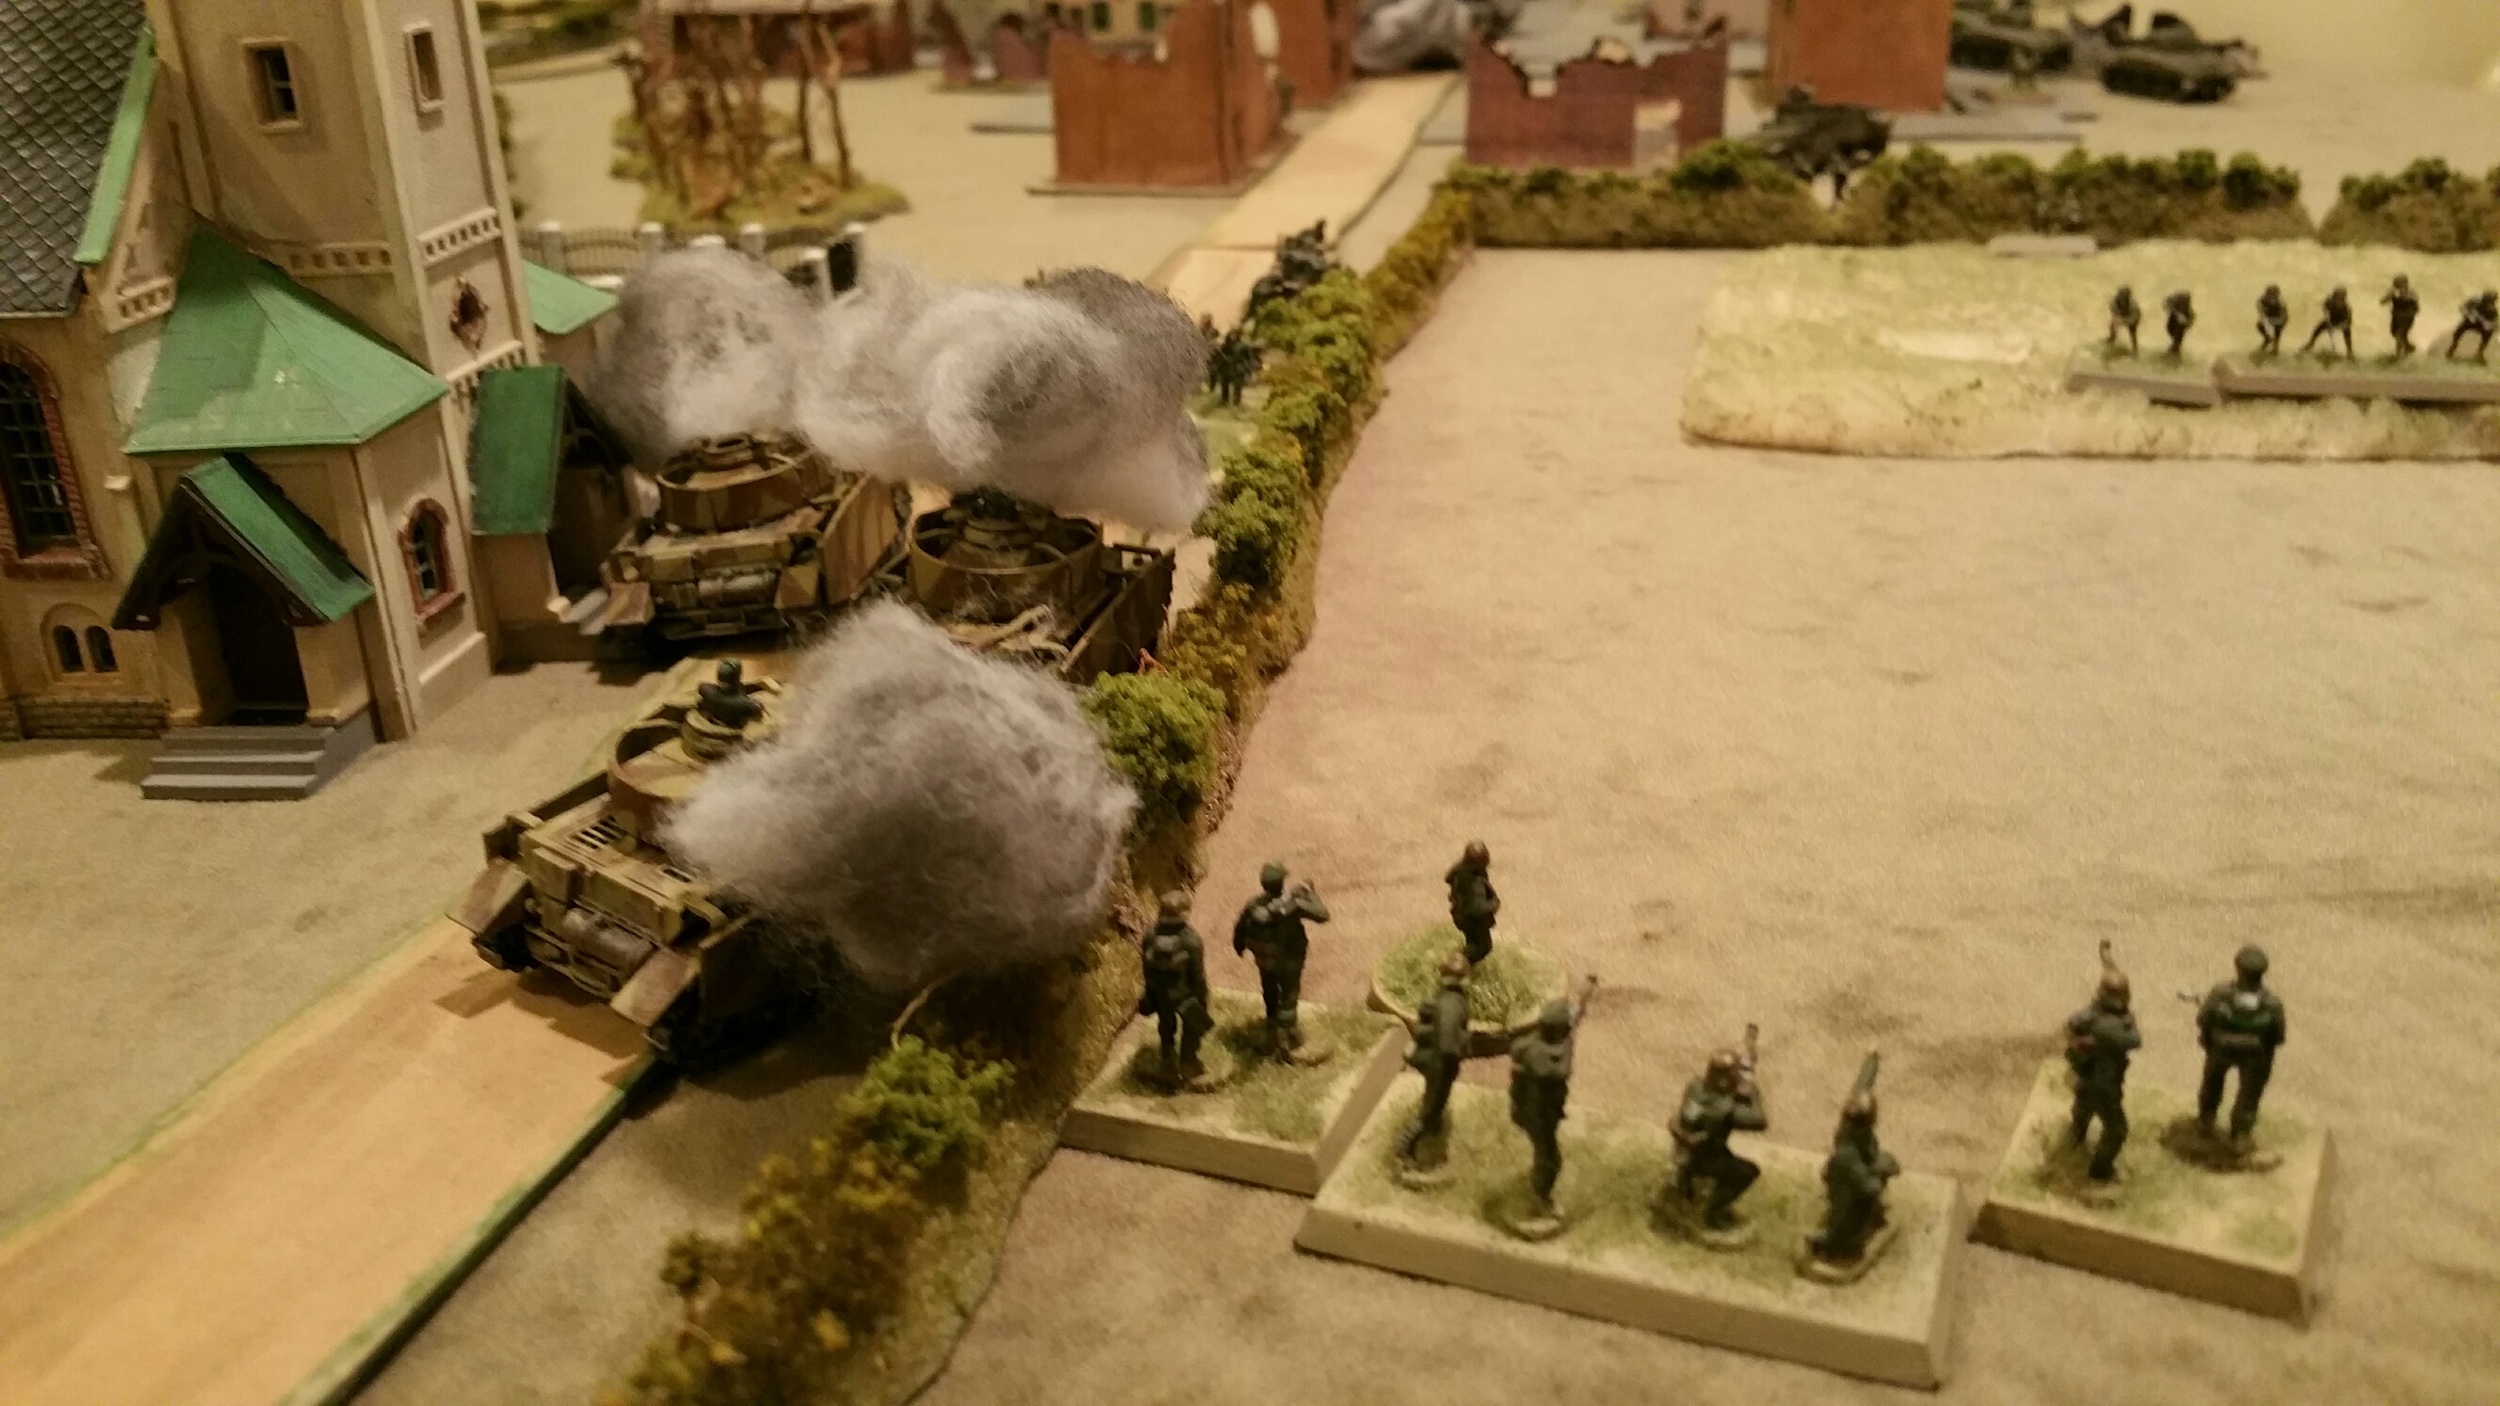   &nbsp;Left flank road around the church is blocked with burning wreckage but German infantry turns the position, defeats the American platoon, and pushes into town.  